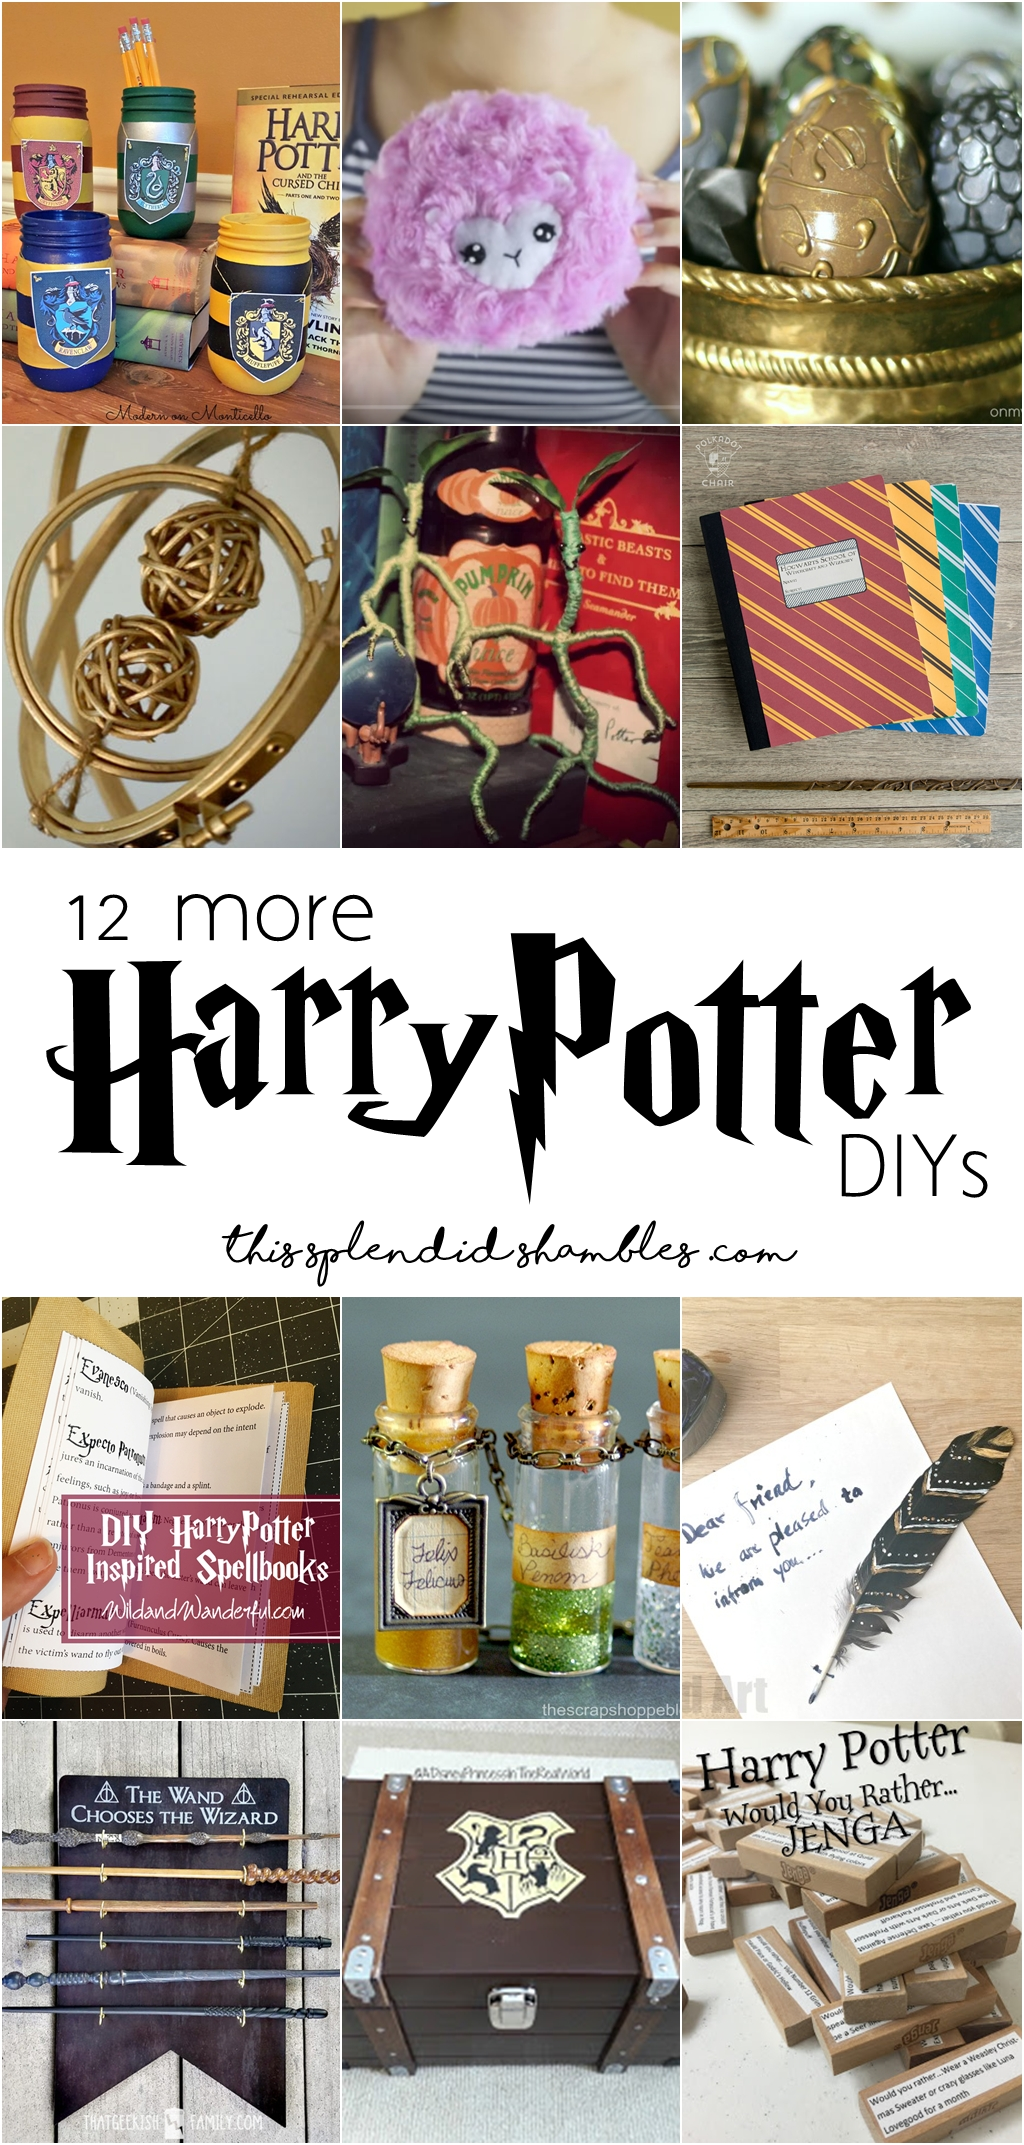 12 Harry Potter DIYs For Muggles And Wizards Alike - 12 Harry Potter DIYs For Muggles And Wizards Alike -   13 diy Presents geek ideas